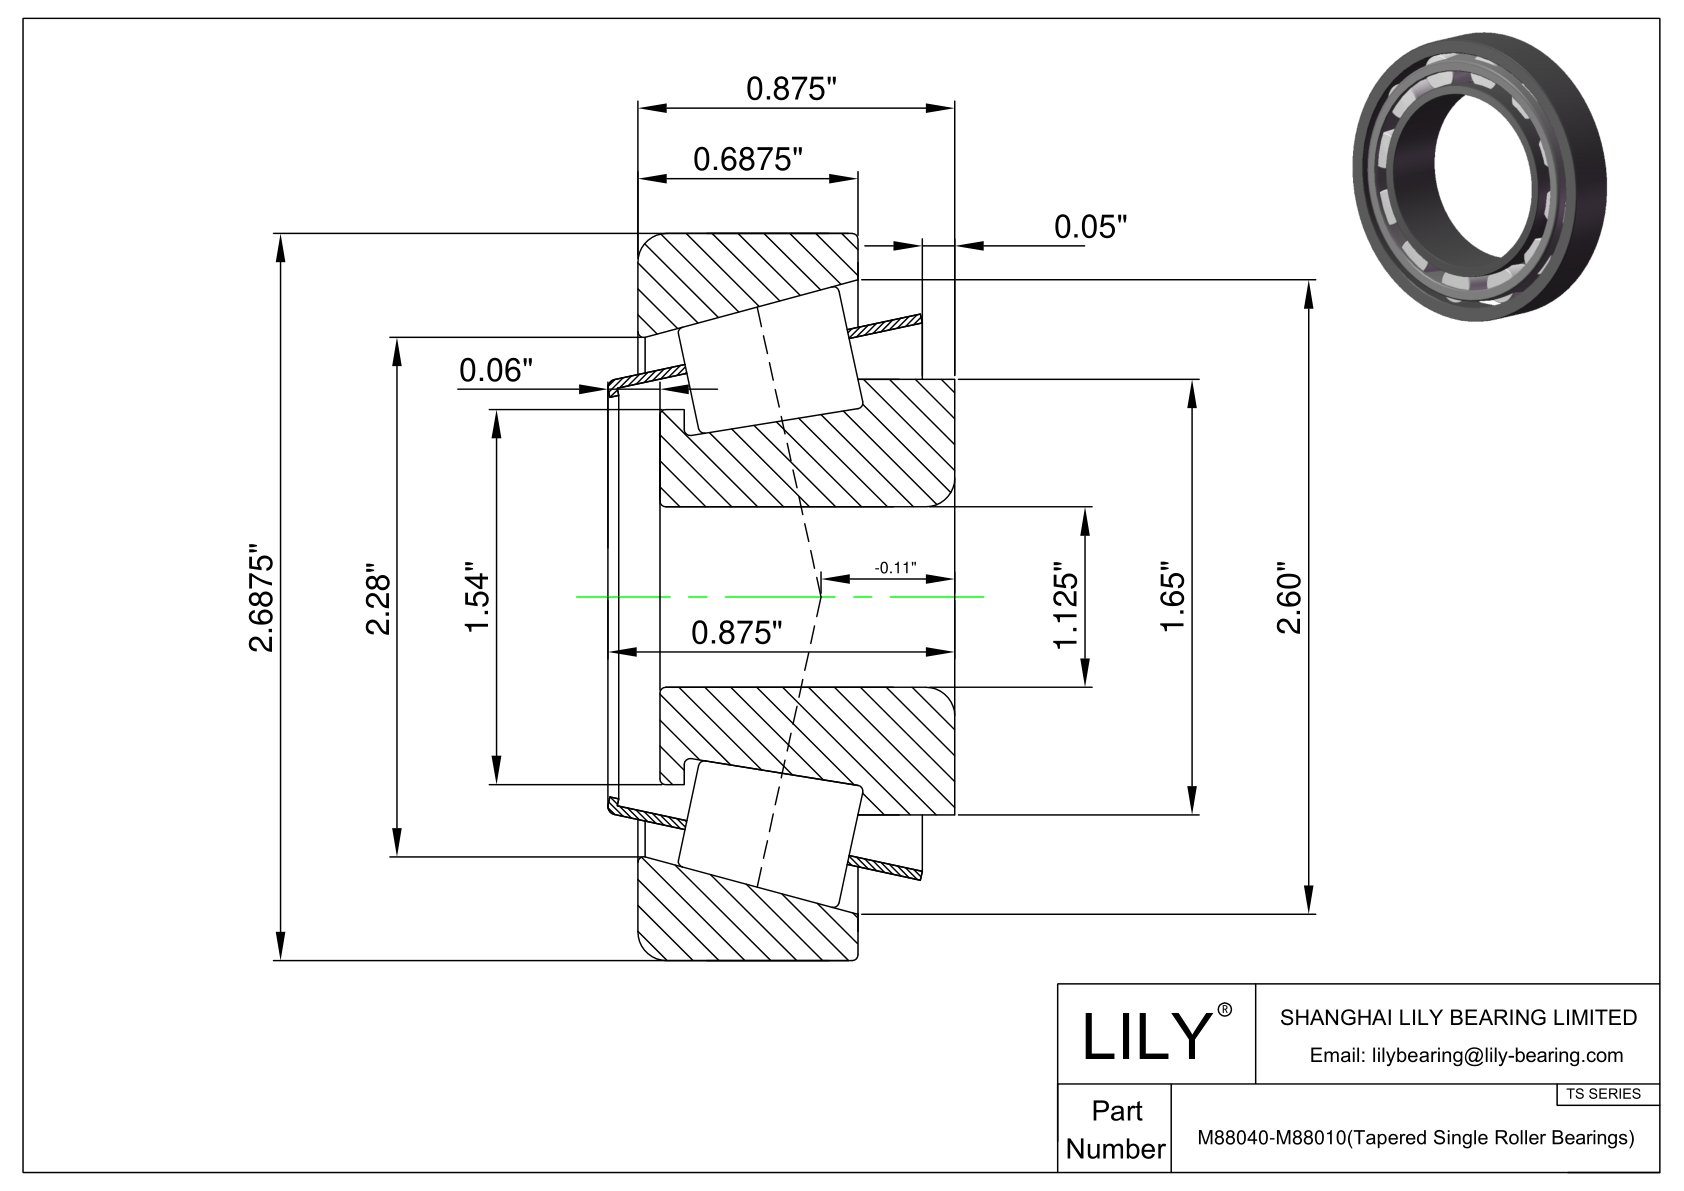 M88040-M88010 TS (Tapered Single Roller Bearings) (Imperial) cad drawing